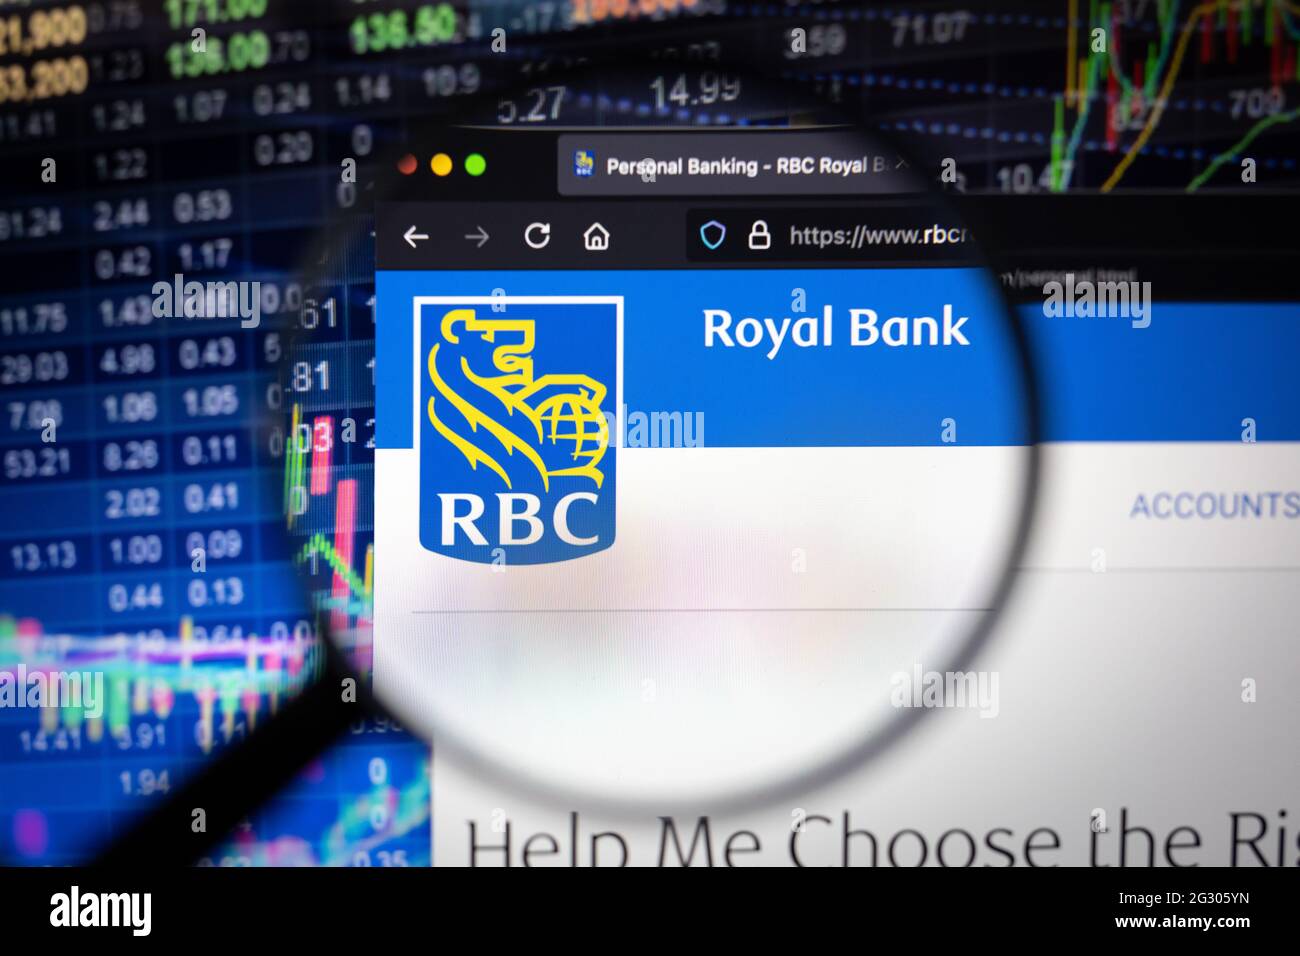 RBC Royal Bank company logo on a website with blurry stock market developments in the background, seen on a computer screen through a magnifying glass Stock Photo